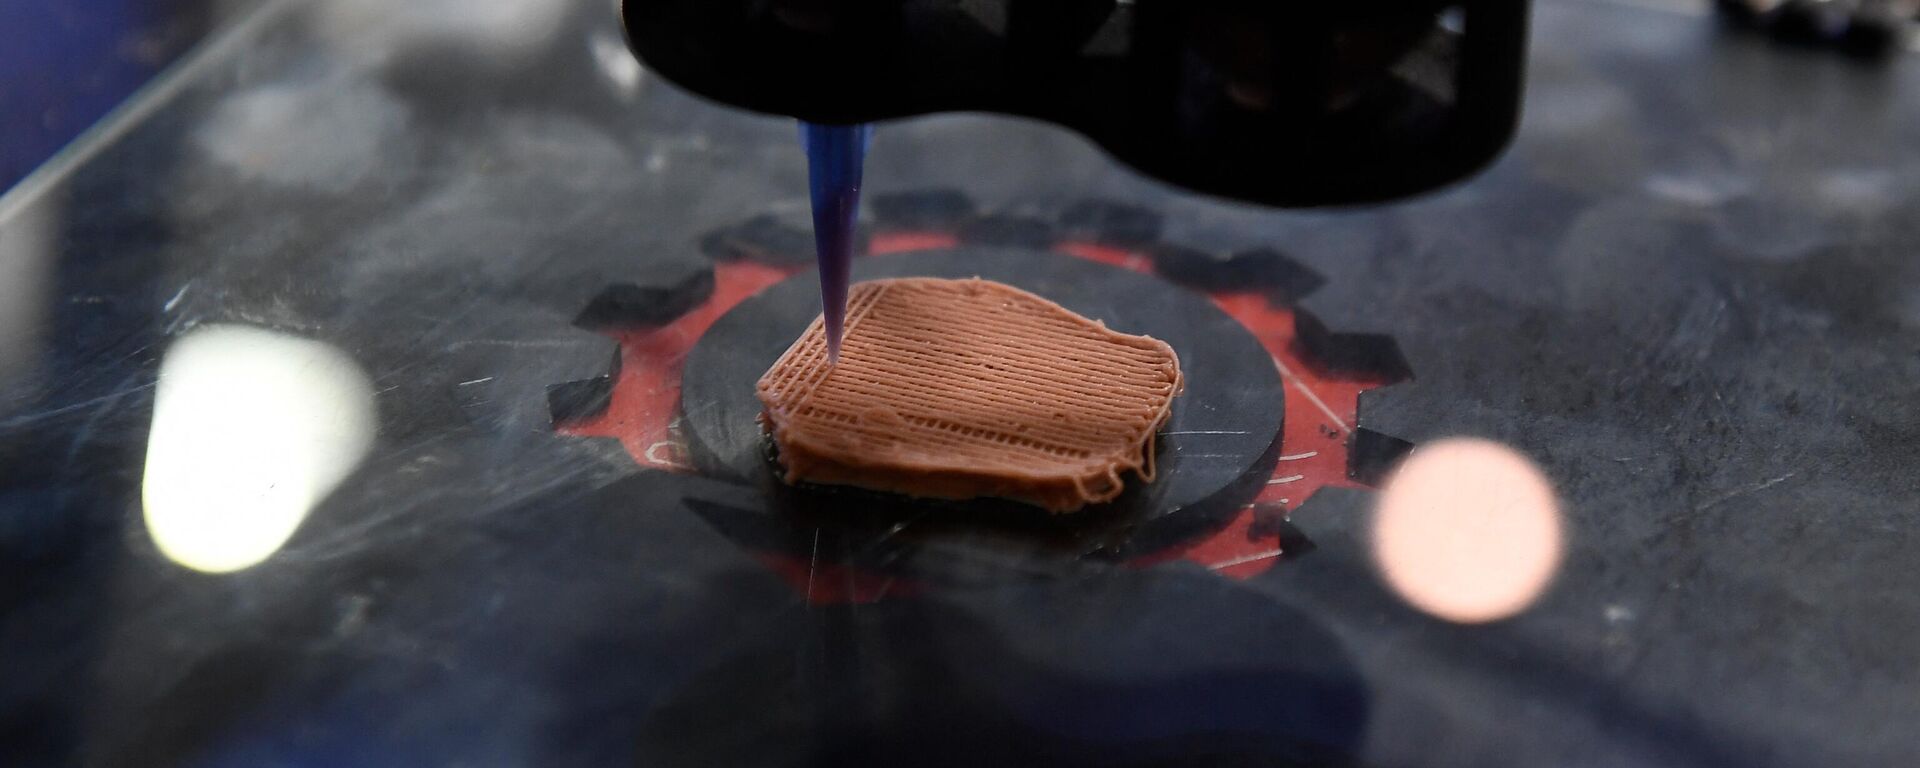 A NOVAMEAT synthetic 3D-printer prints plant-based proteins that can mimic the texture of beef at the Mobile World Congress (MWC) fair in Barcelona on June 30, 2021 - Sputnik International, 1920, 16.11.2023